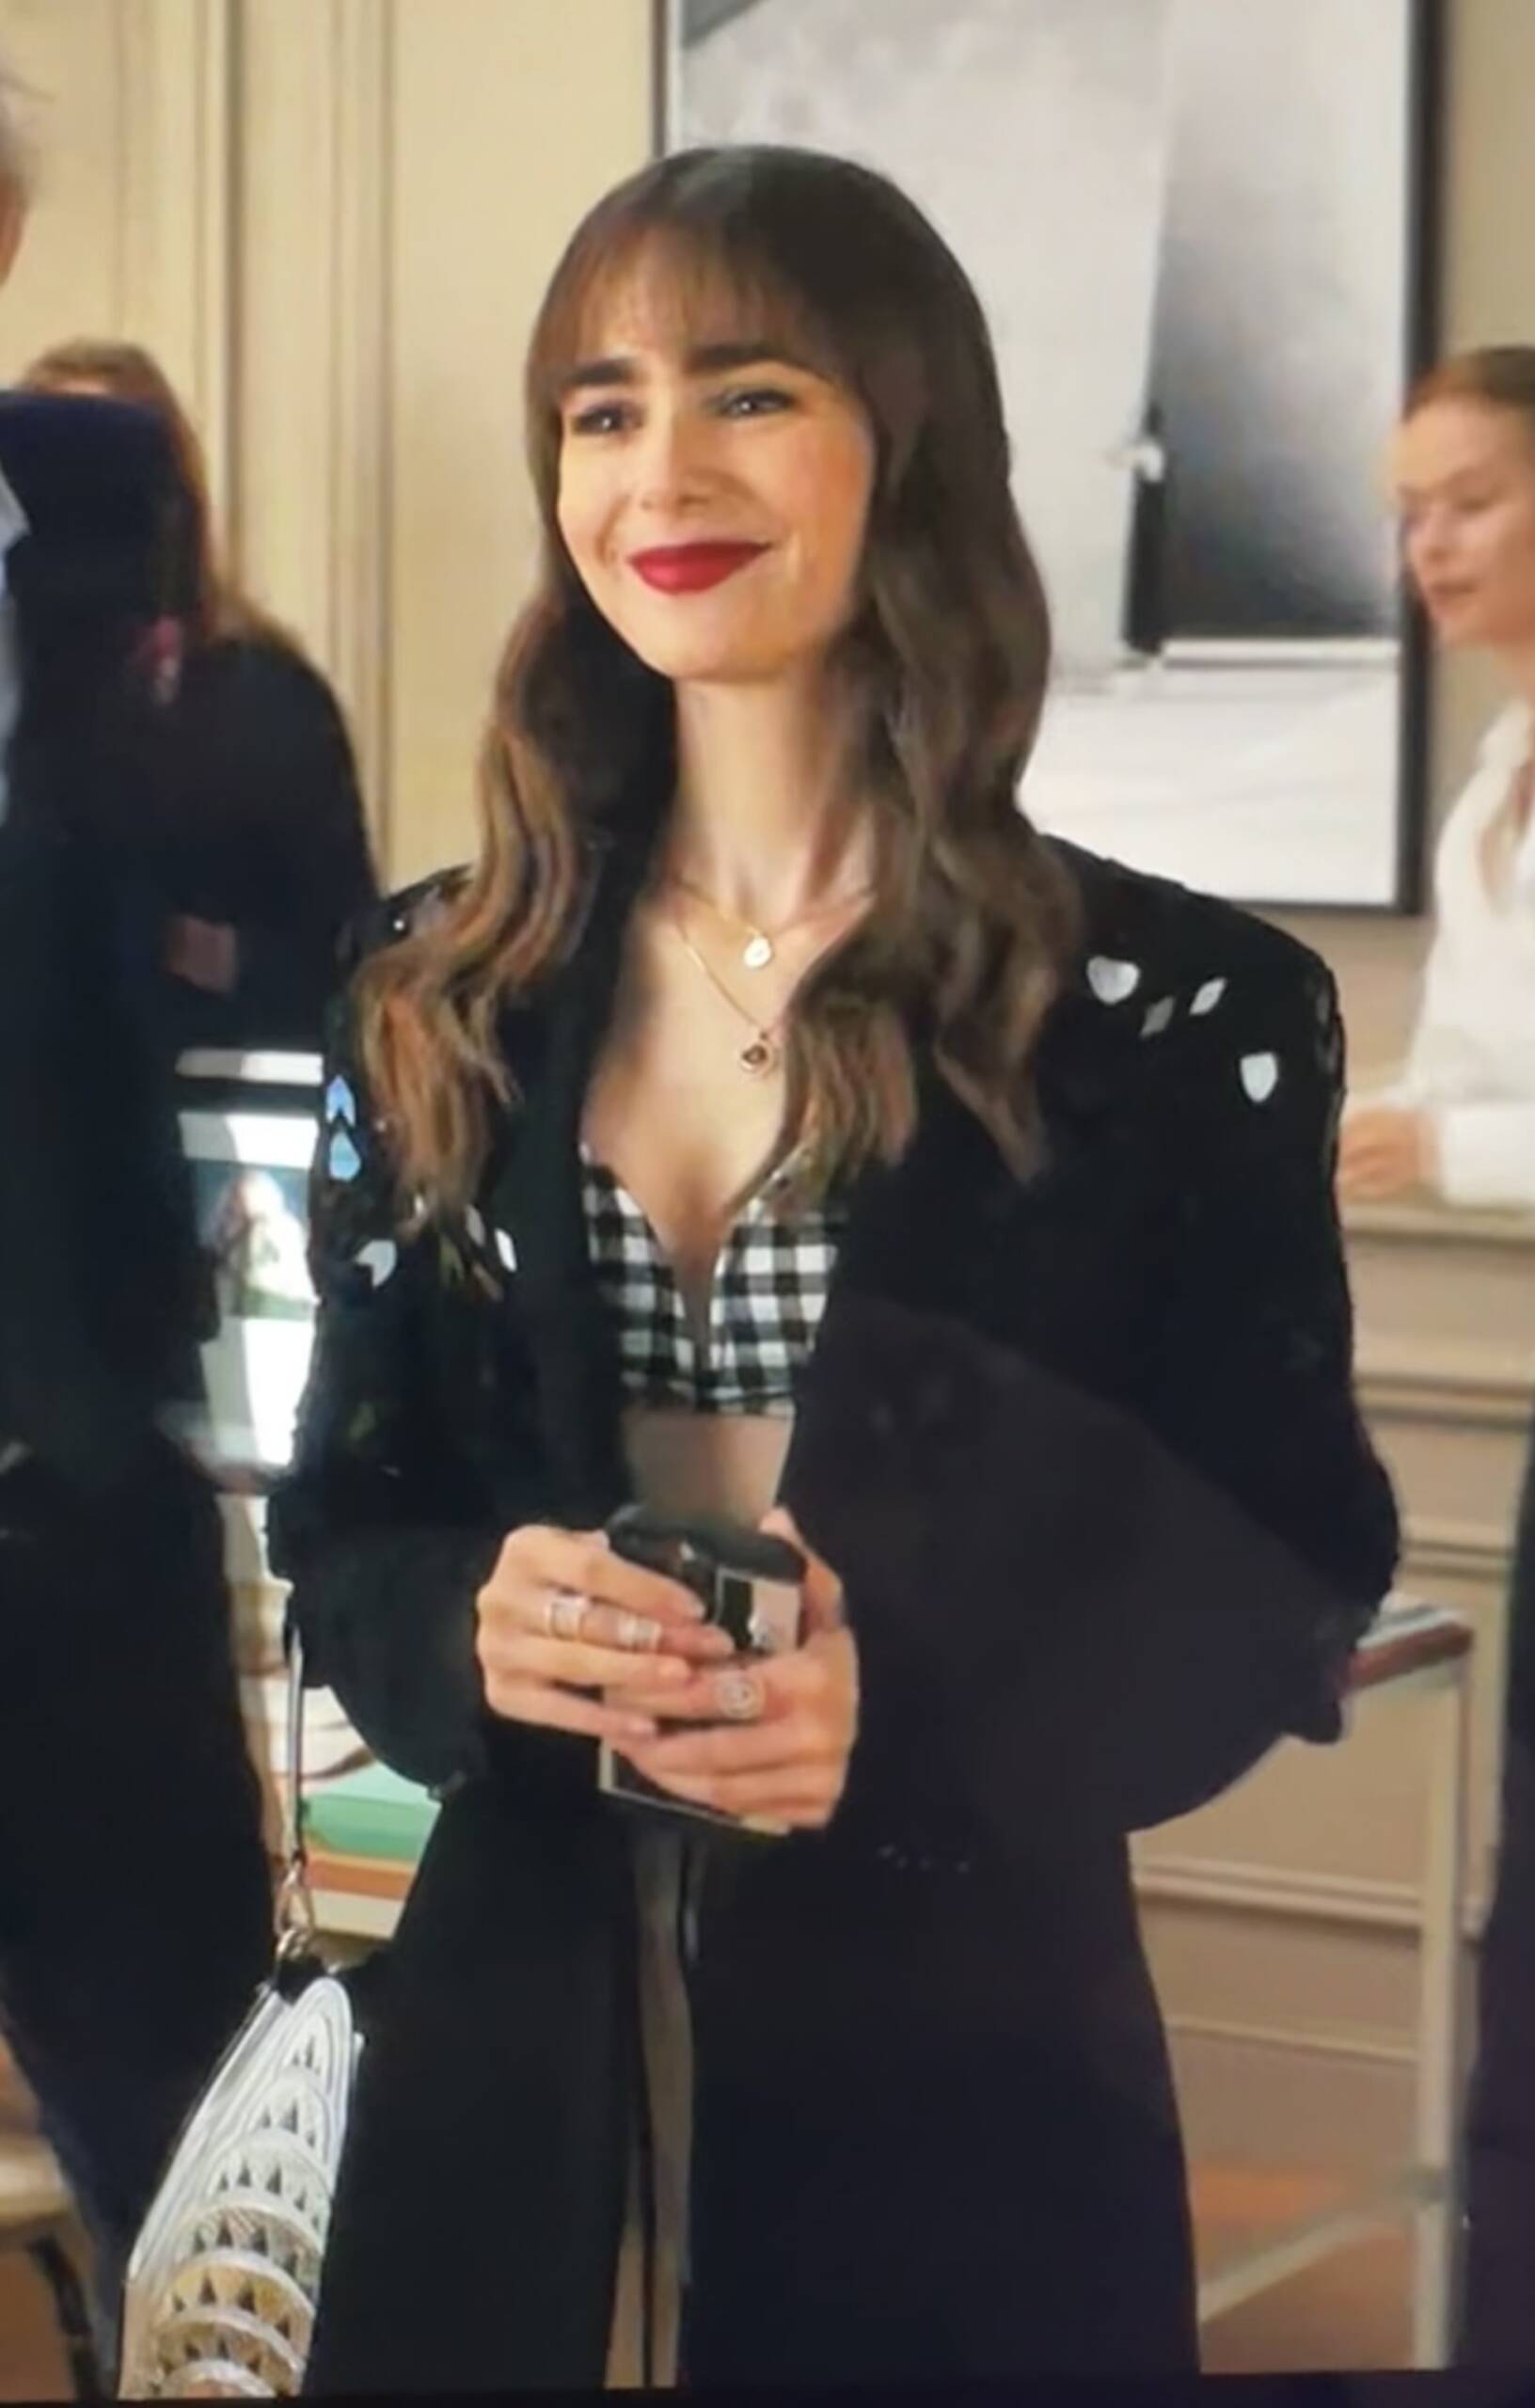 Emily in Paris Season 3 Episode 5 wearing a Barbara Bui Black blazer with a black and white gingham bandeau from Livy Studio with a silver building handbag in the crook of her arm. Nicolas Ghesquière designed the Louis Vuitton Minaudiere after the Chrysler Building in New York City in his 2020 collection.